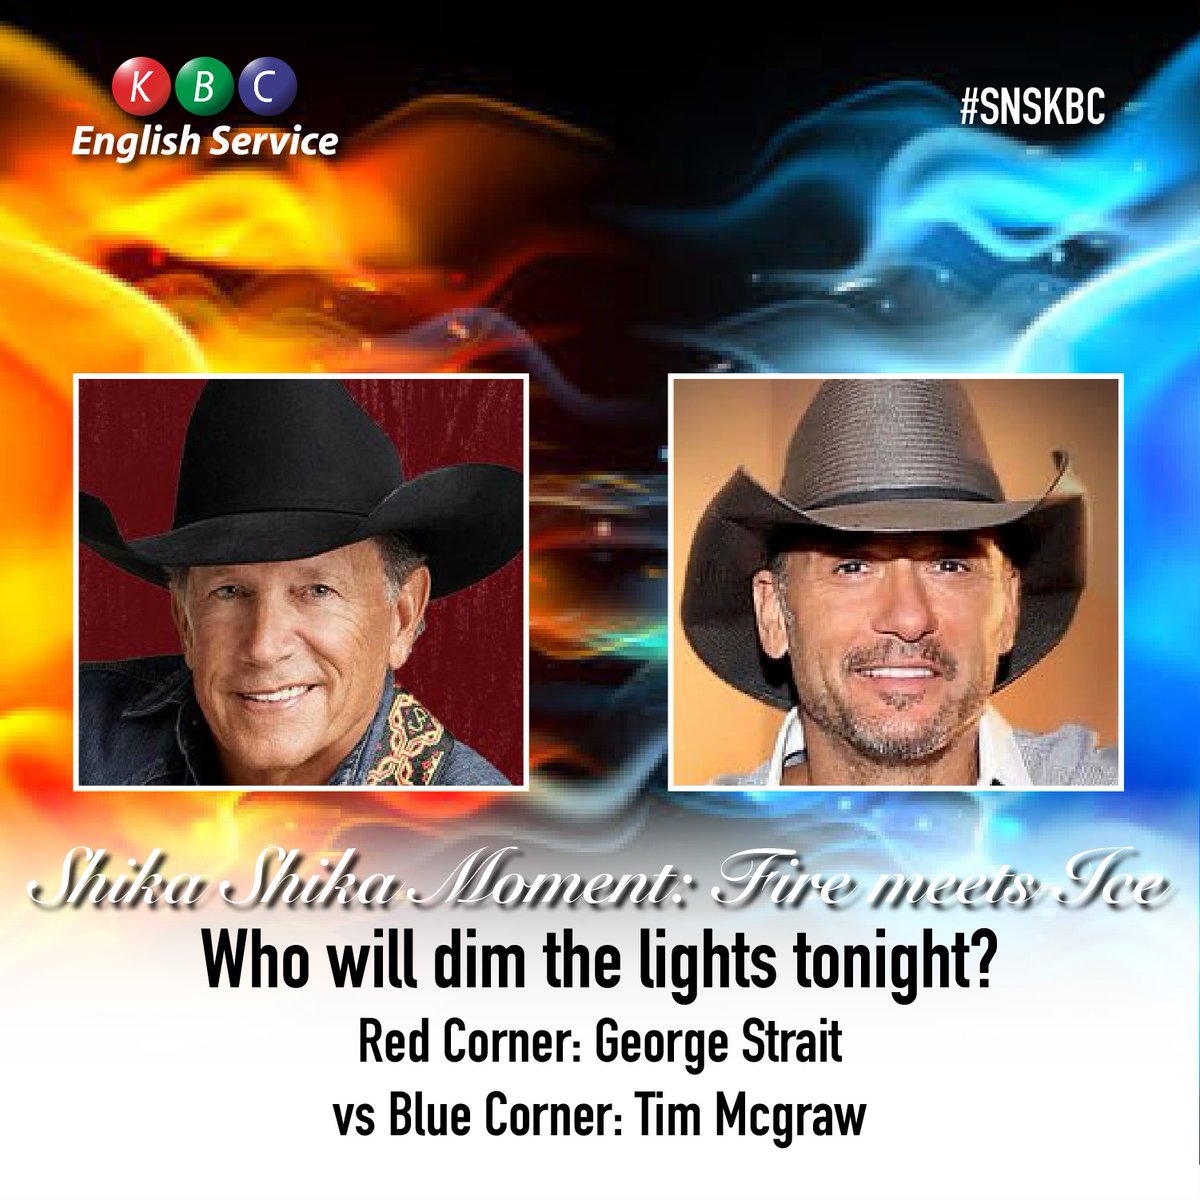 Shika Shika Time: Fire meets Ice. What love song should be on tonight? Who dims the lights tonight? Red Corner: George Strait vs Blue Corner: Tim Mcgraw. #snskbc